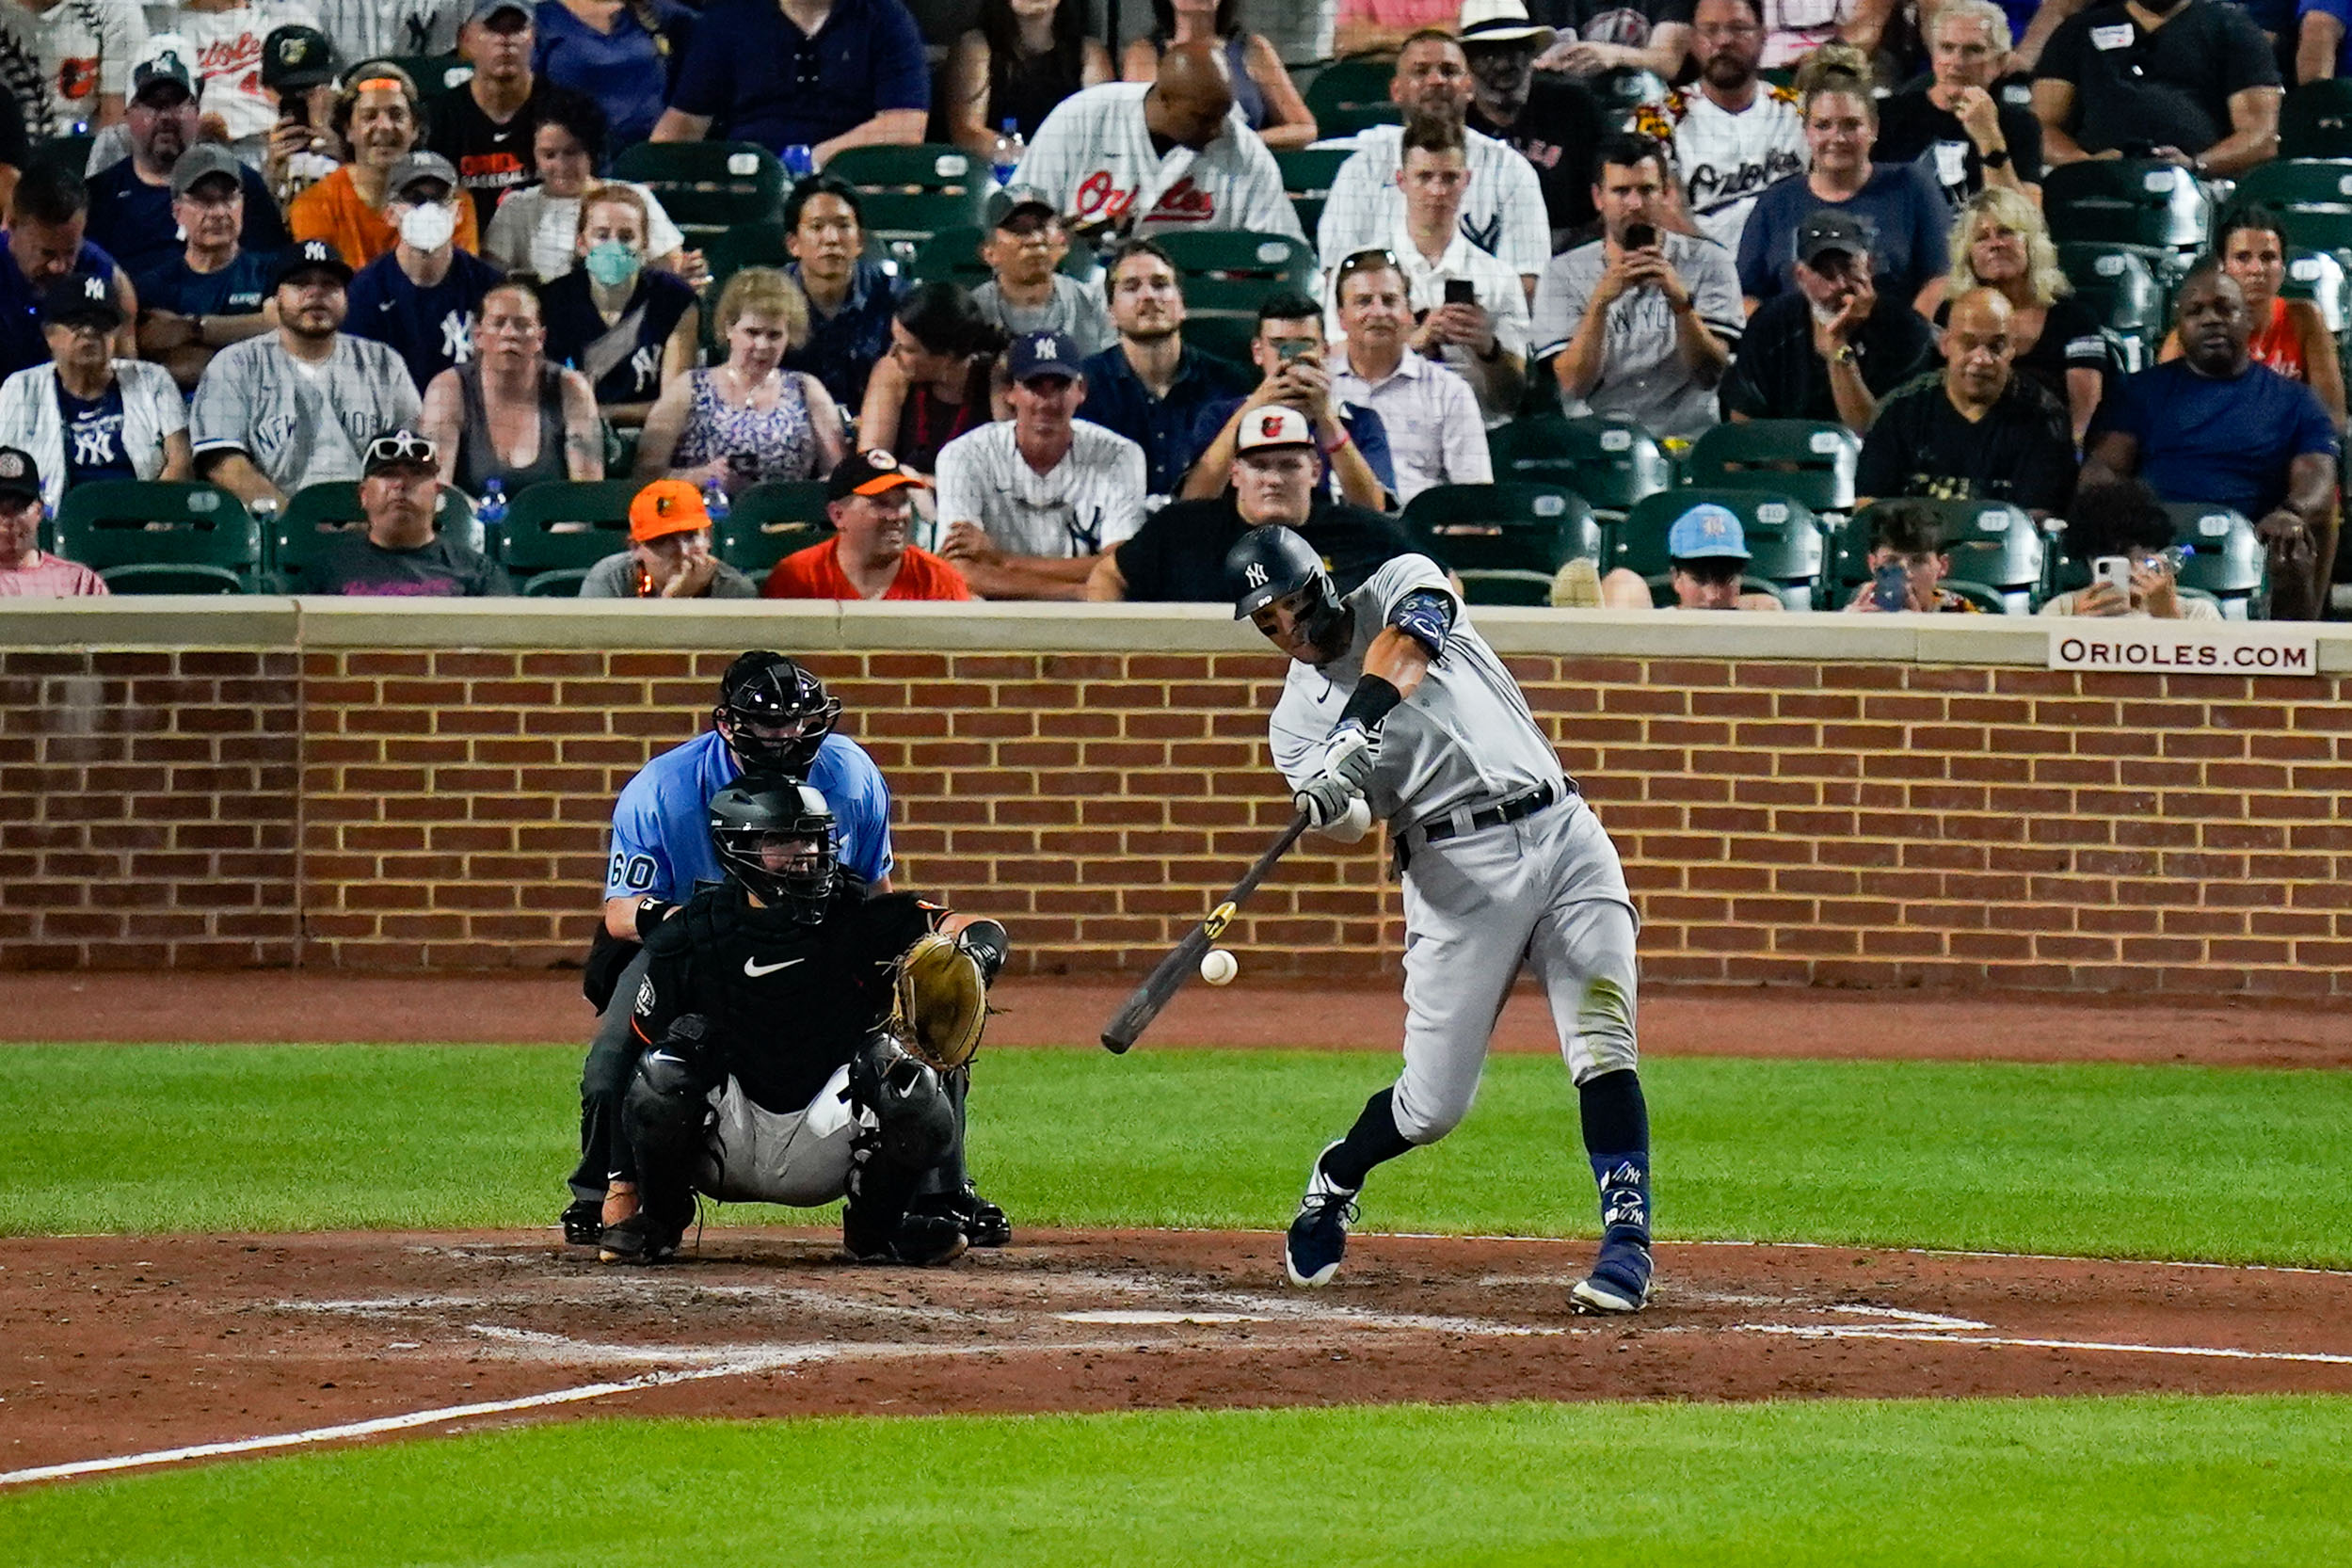 New York Yankees: 3 major takeaways from the win over the Orioles